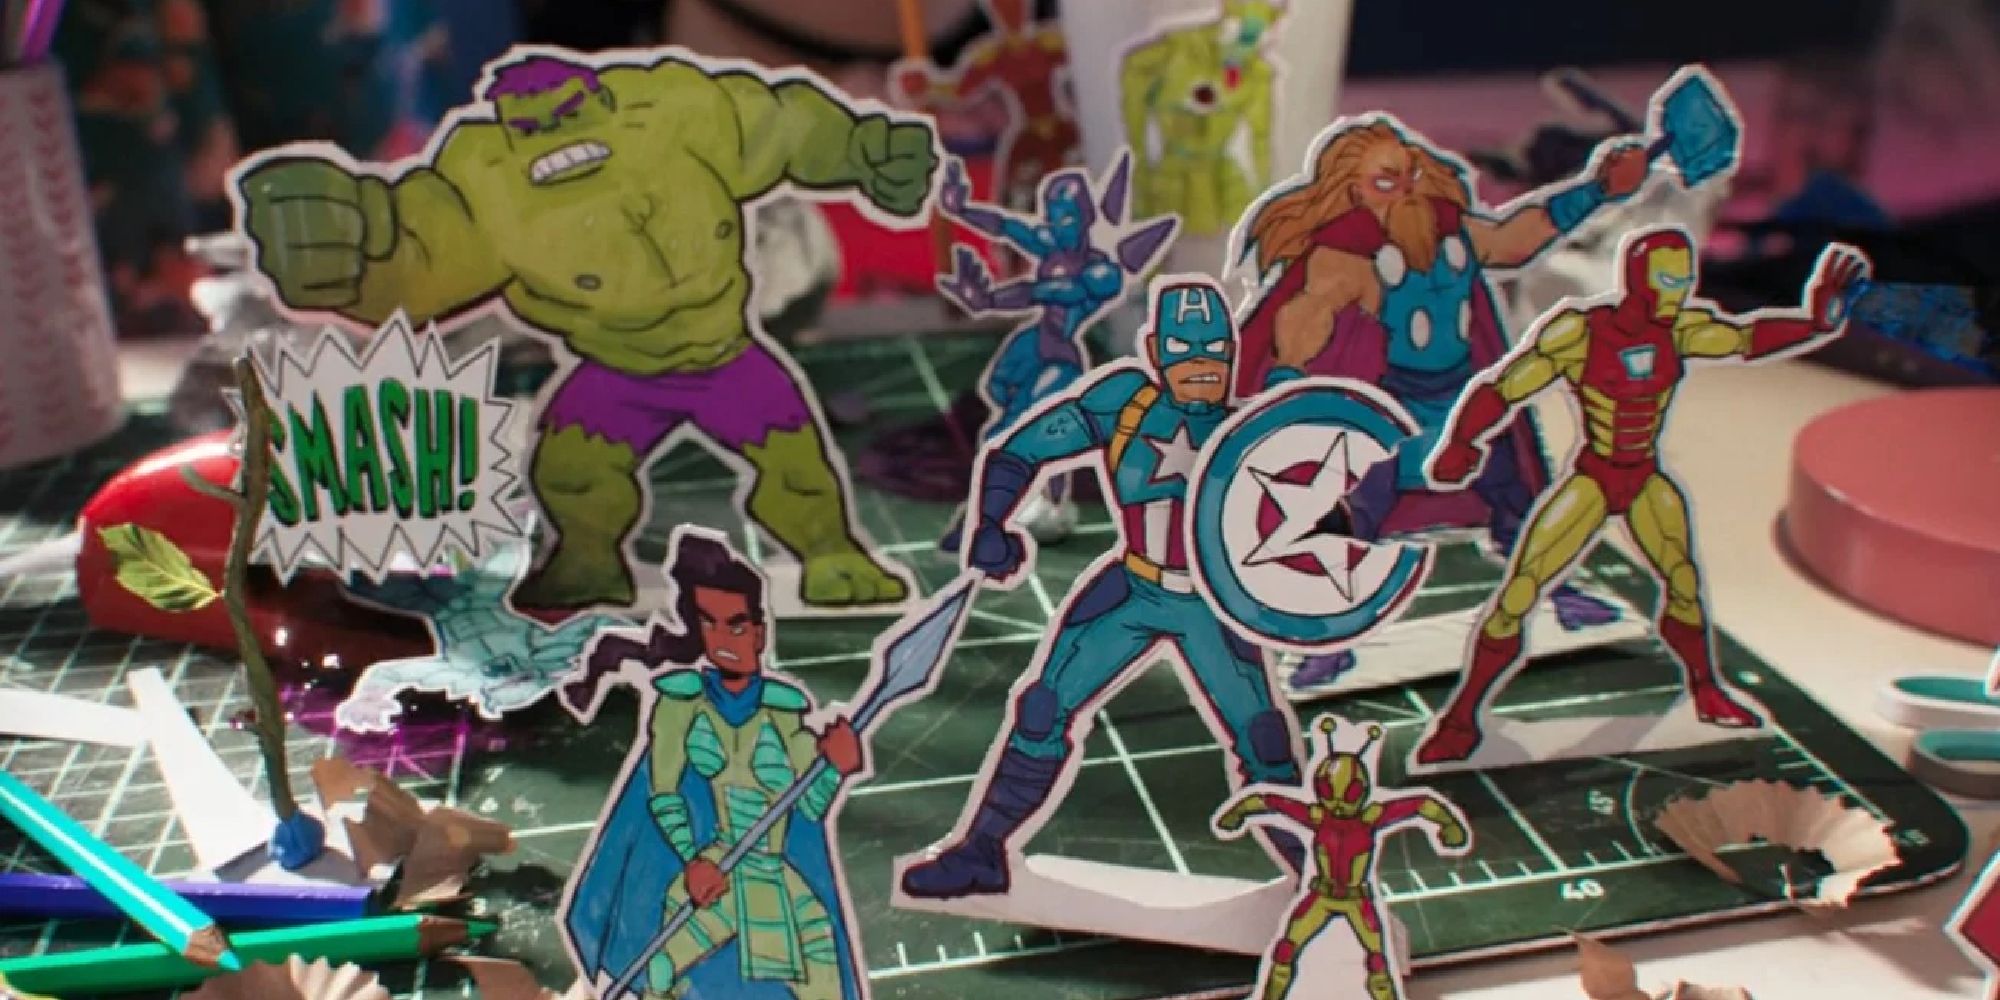 An Endgame recap in Ms. Marvel showing cartoon Valkyrie, Hulk, Rescue, Captain America, Thor, Ant-Man, and Iron Man